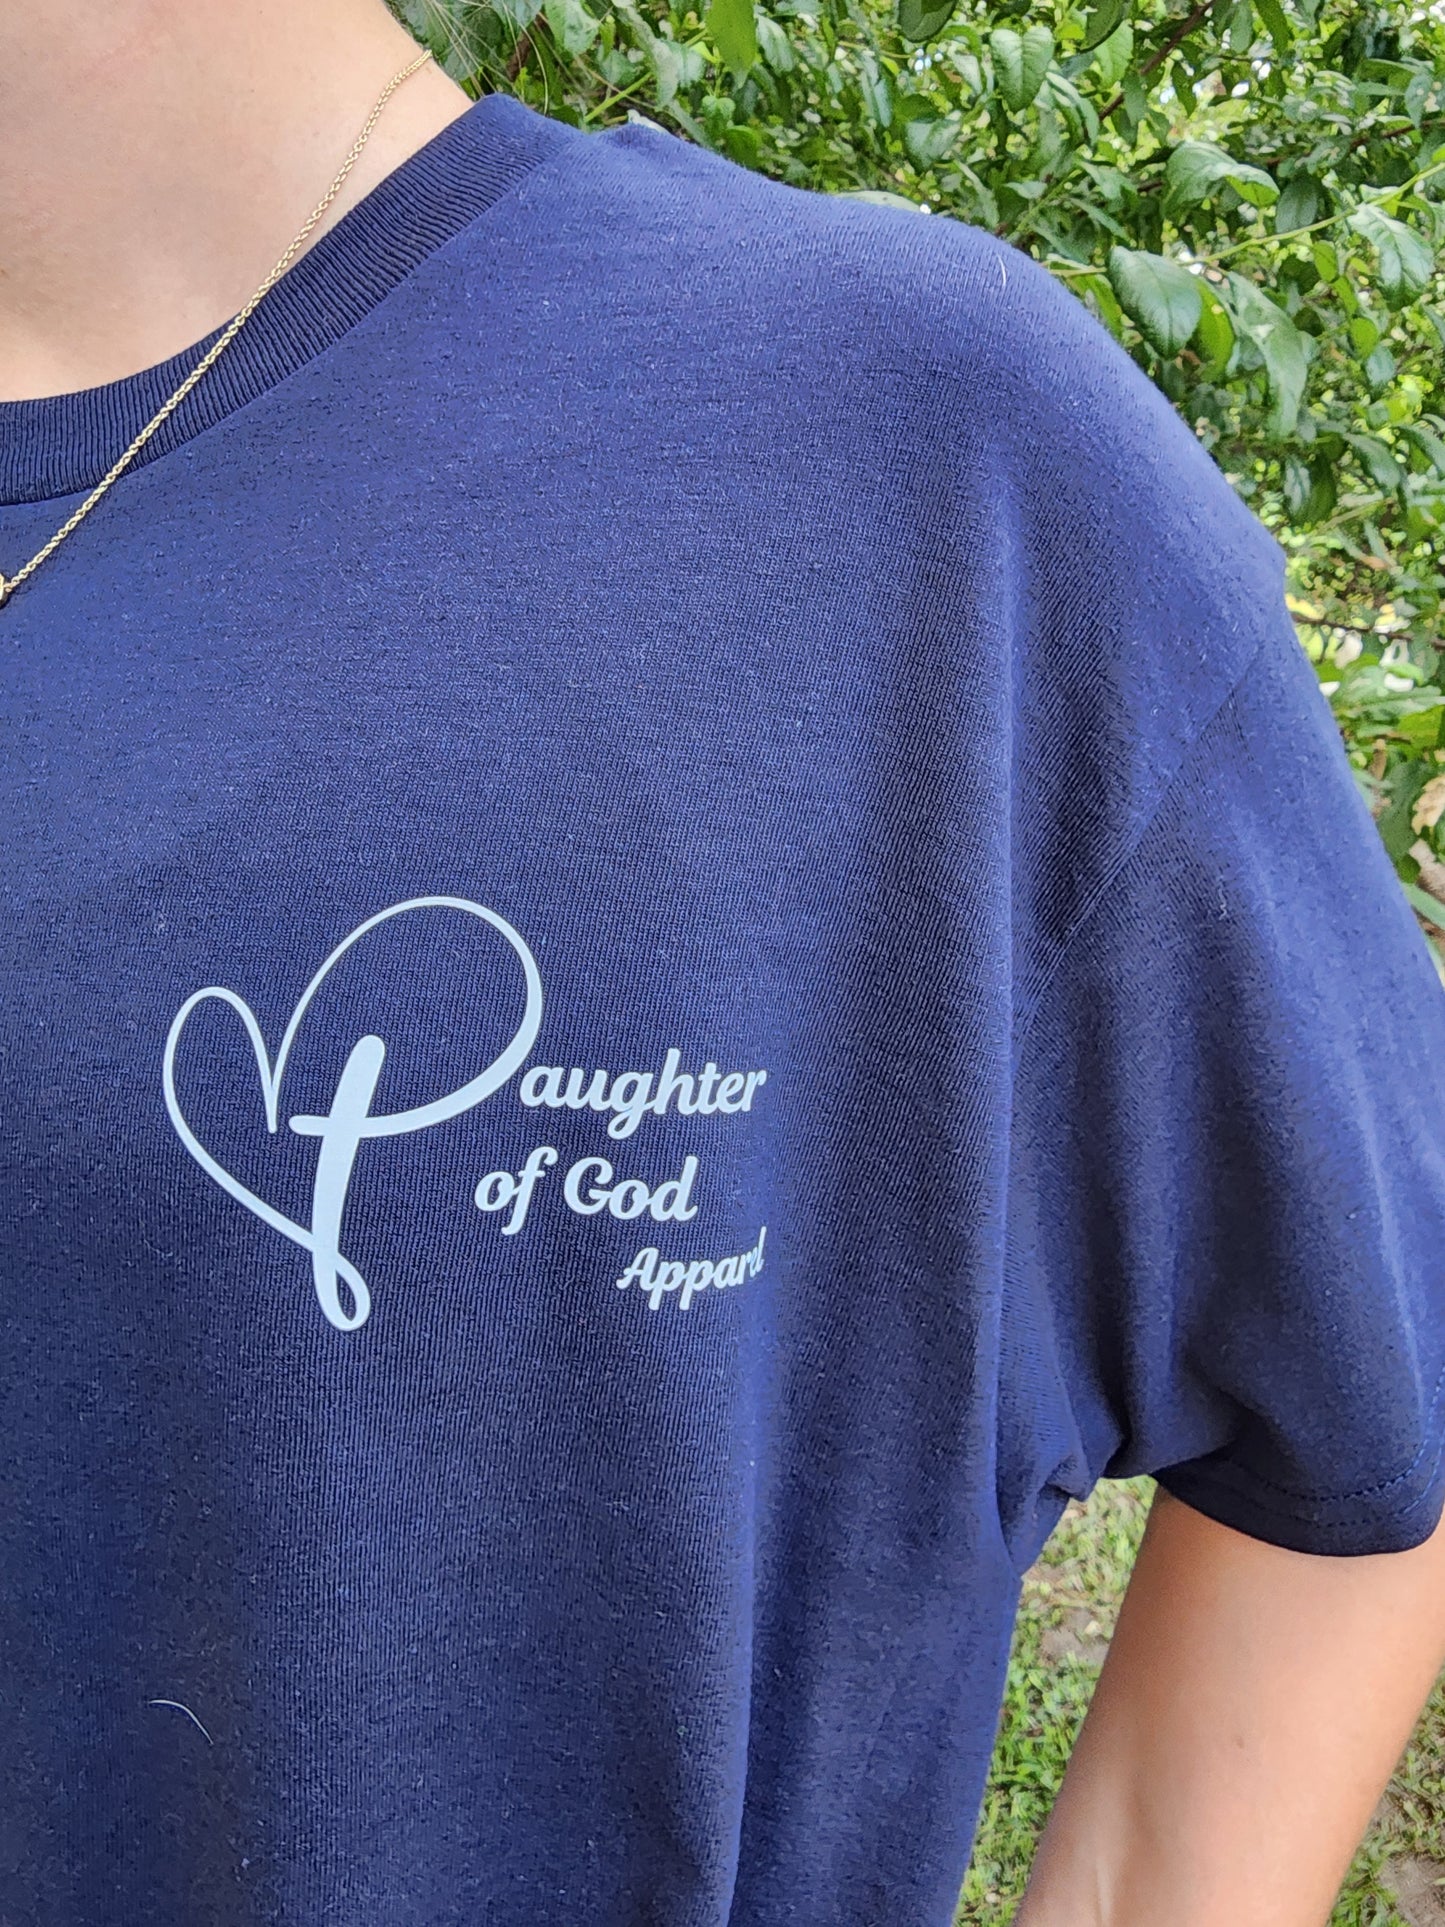 Christian Graphic tees